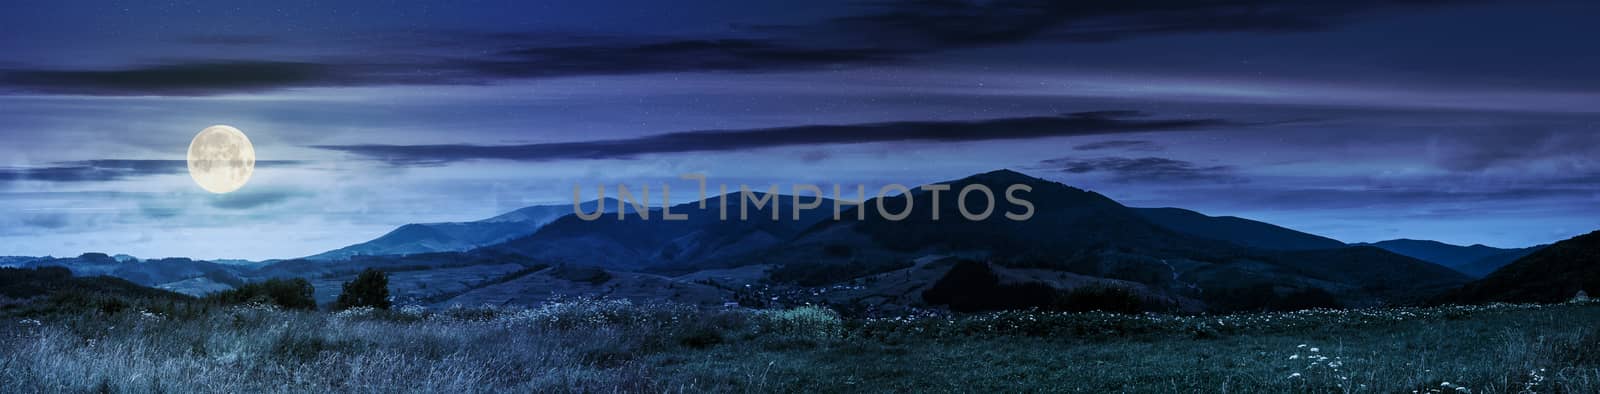 Summer landscape panoramic image of rural fields in mountains under cloudy sky at night in full moon light